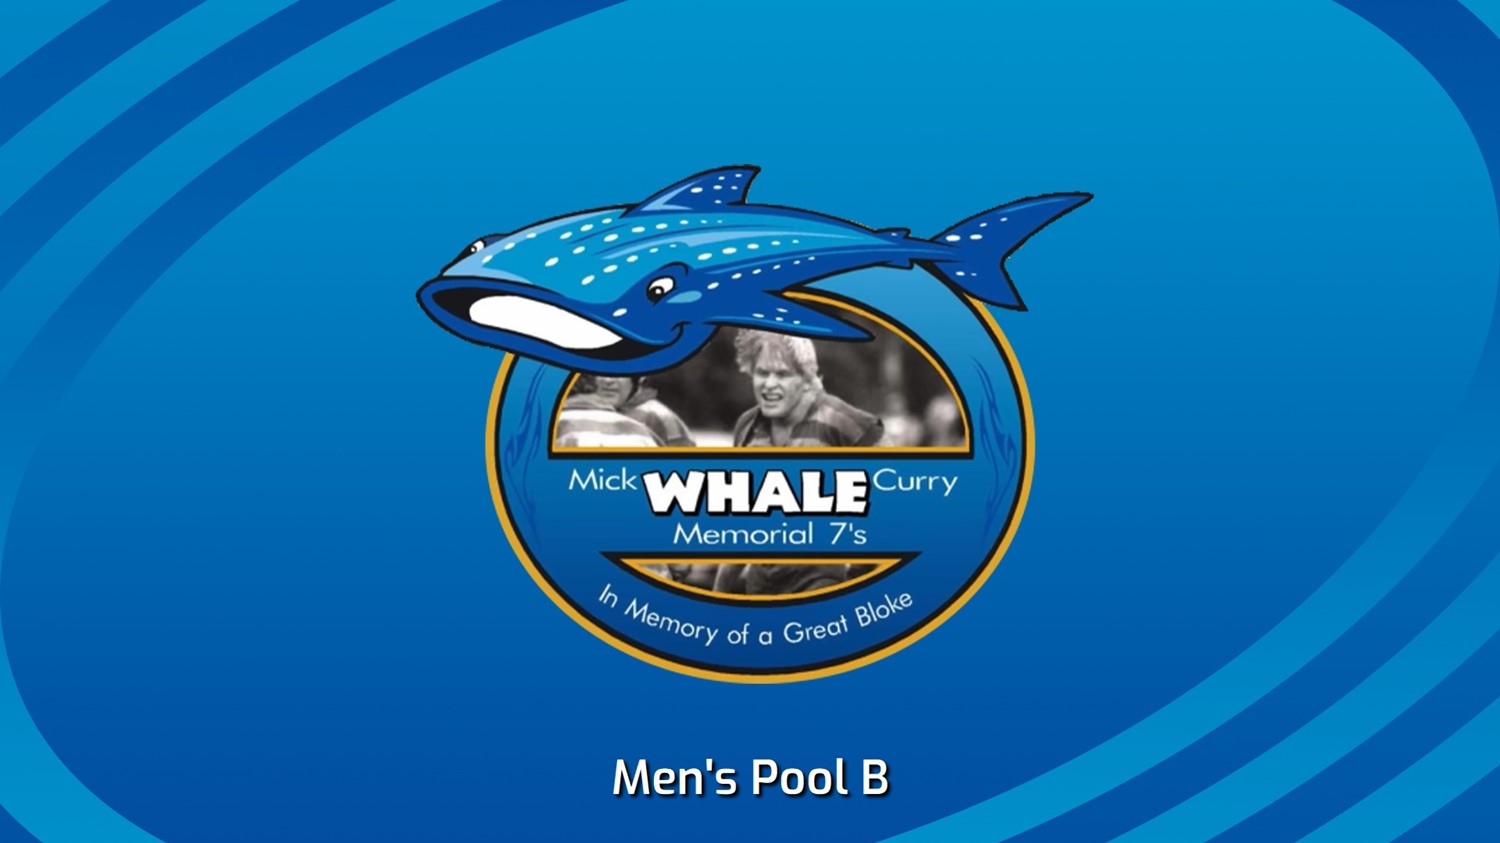 240209-Mick "Whale" Curry Memorial Rugby Sevens Men's Pool B - Briars v Eastwood Minigame Slate Image